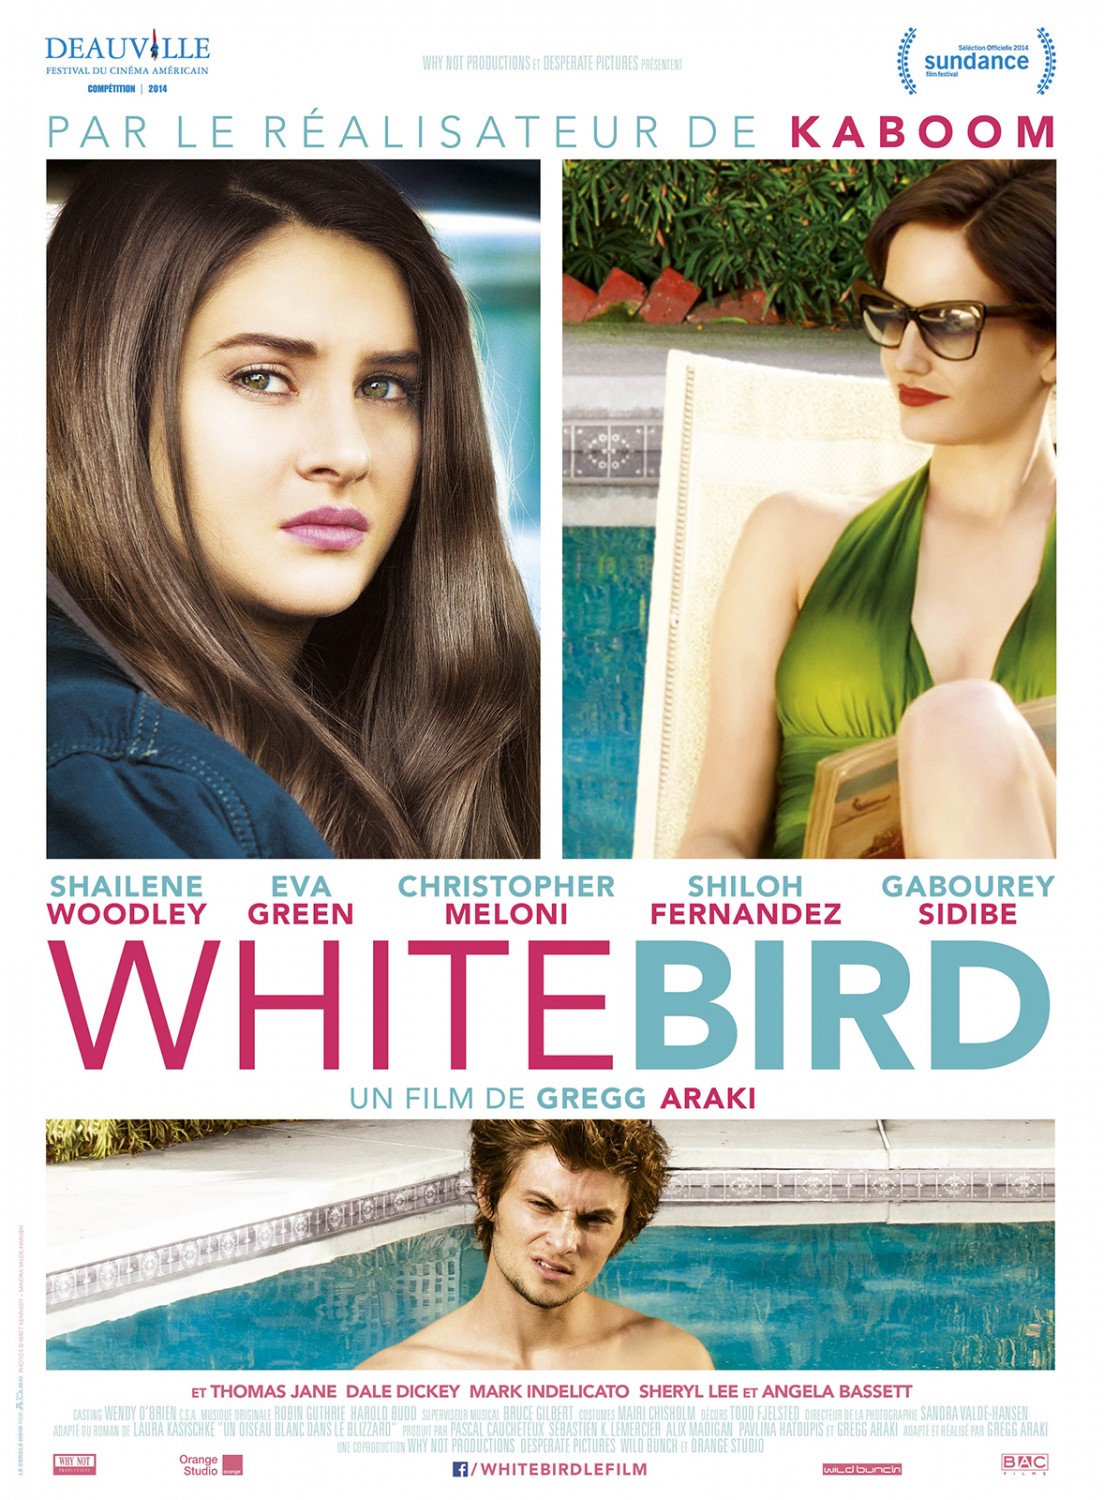 White Bird in a Blizzard (2 of 4) Extra Large Movie Poster Image